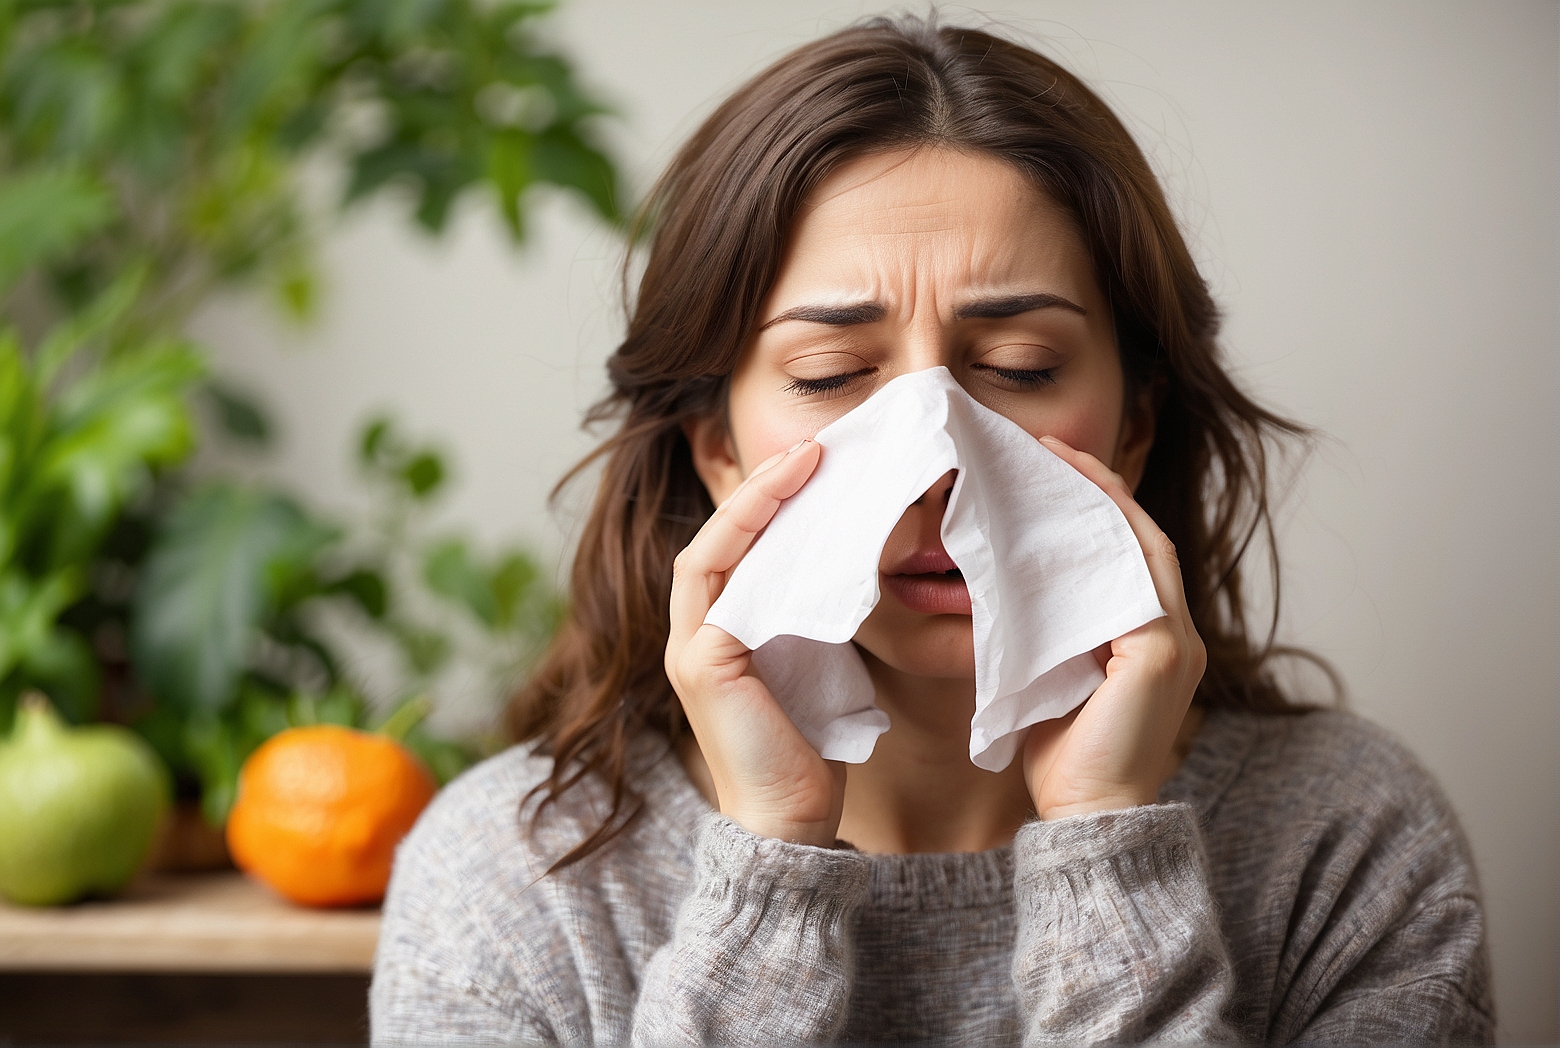 10 Home Remedies for Sinus Infections